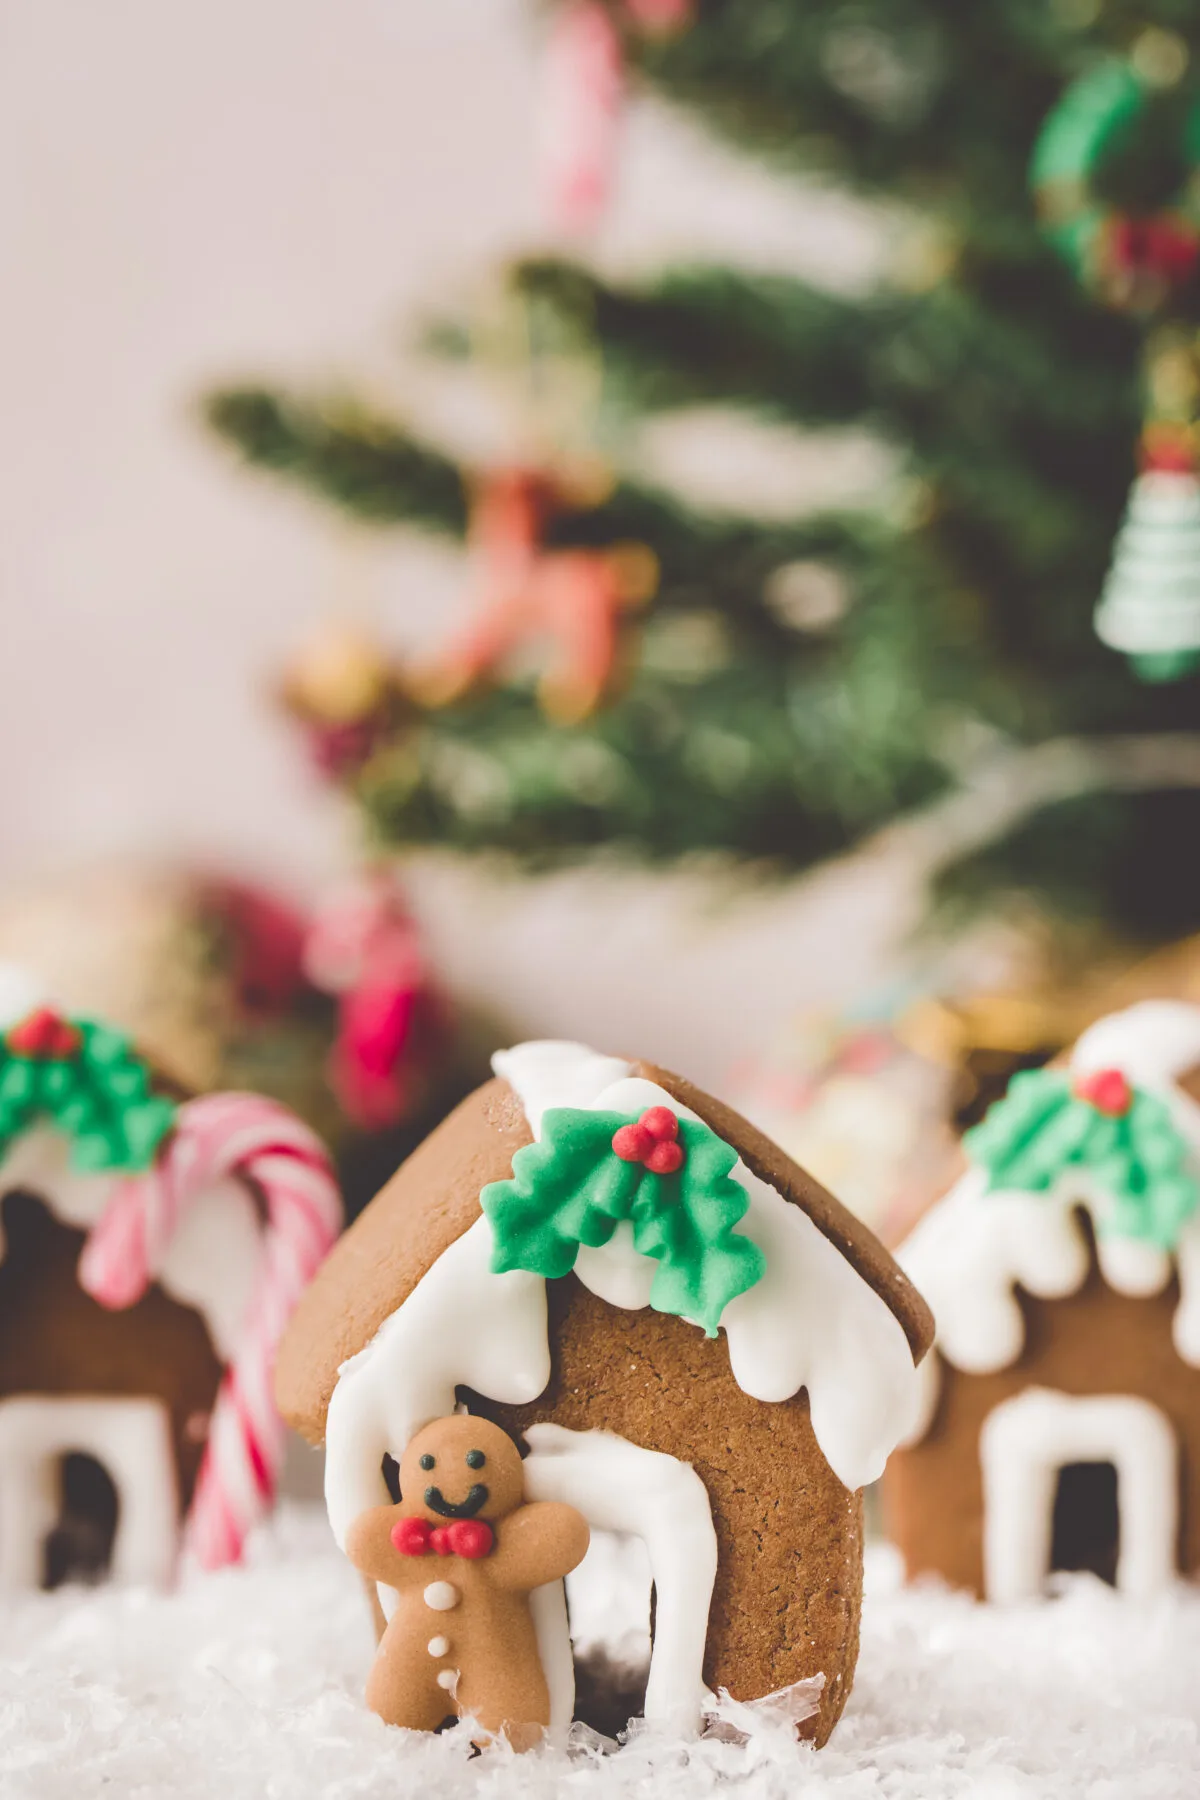 Make your own little gingerbread house mug toppers with this recipe. These mini gingerbread houses are adorable and festive holiday treats.